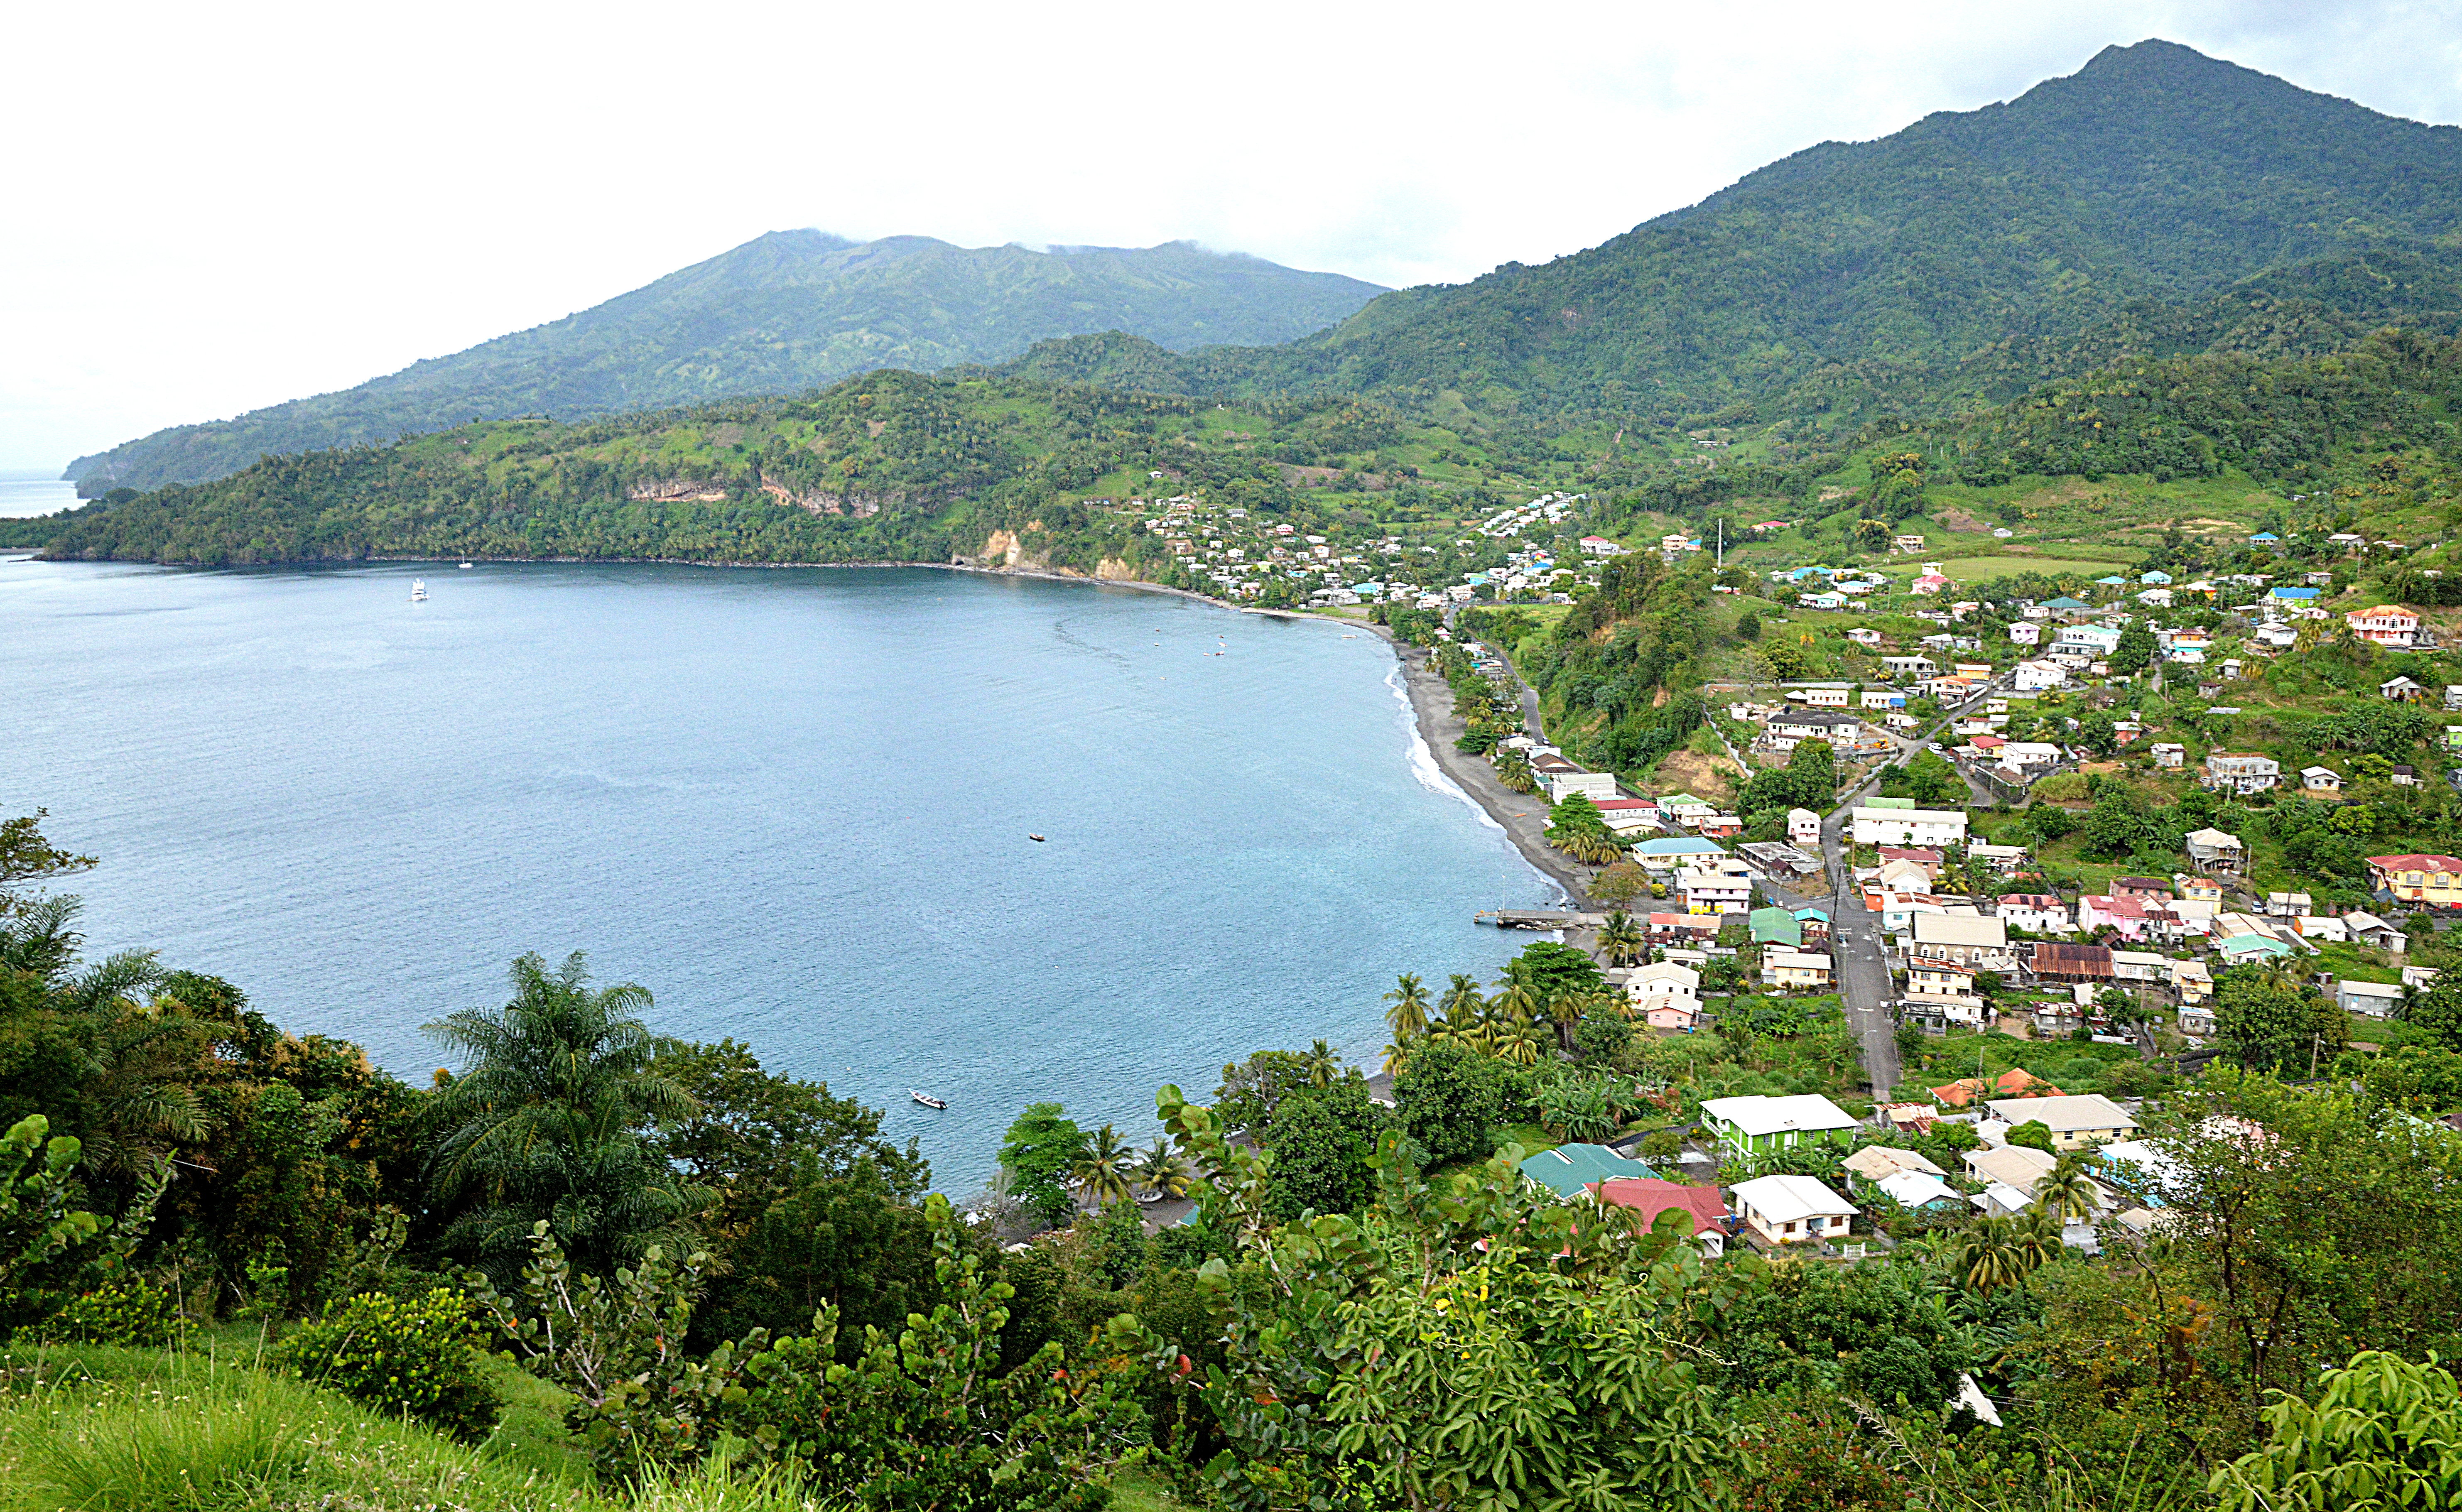 Chateaubelair is one of the 12 target communities of the “Volcano-Ready Communities in St. Vincent and the Grenadines” project. Chateaubelair (forefront) and La Soufrière (background).